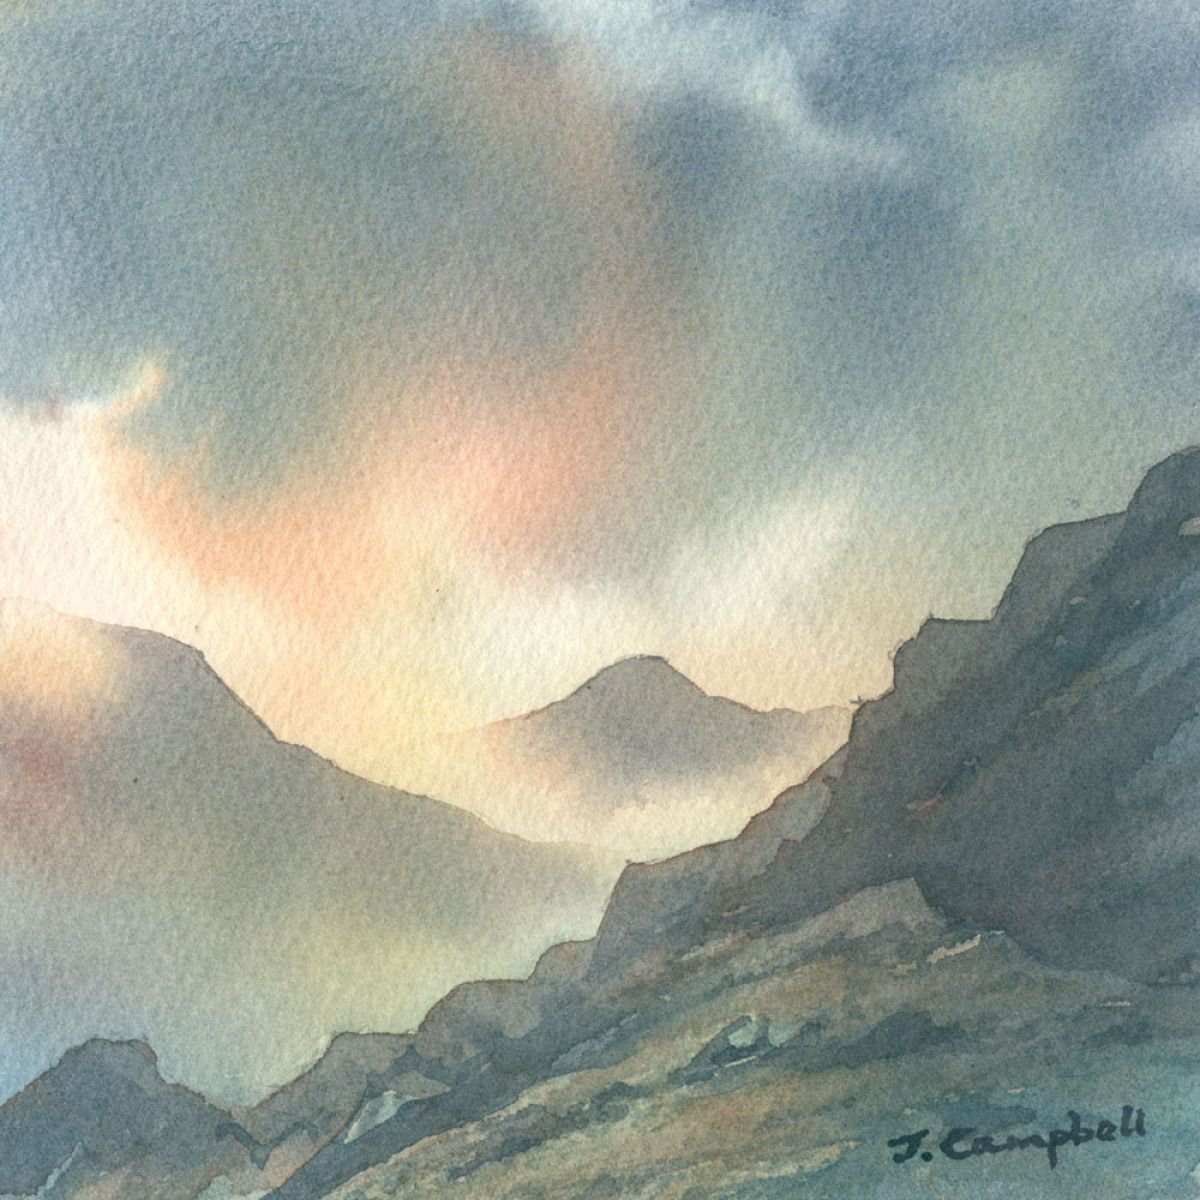 View from Blencathra by John Campbell